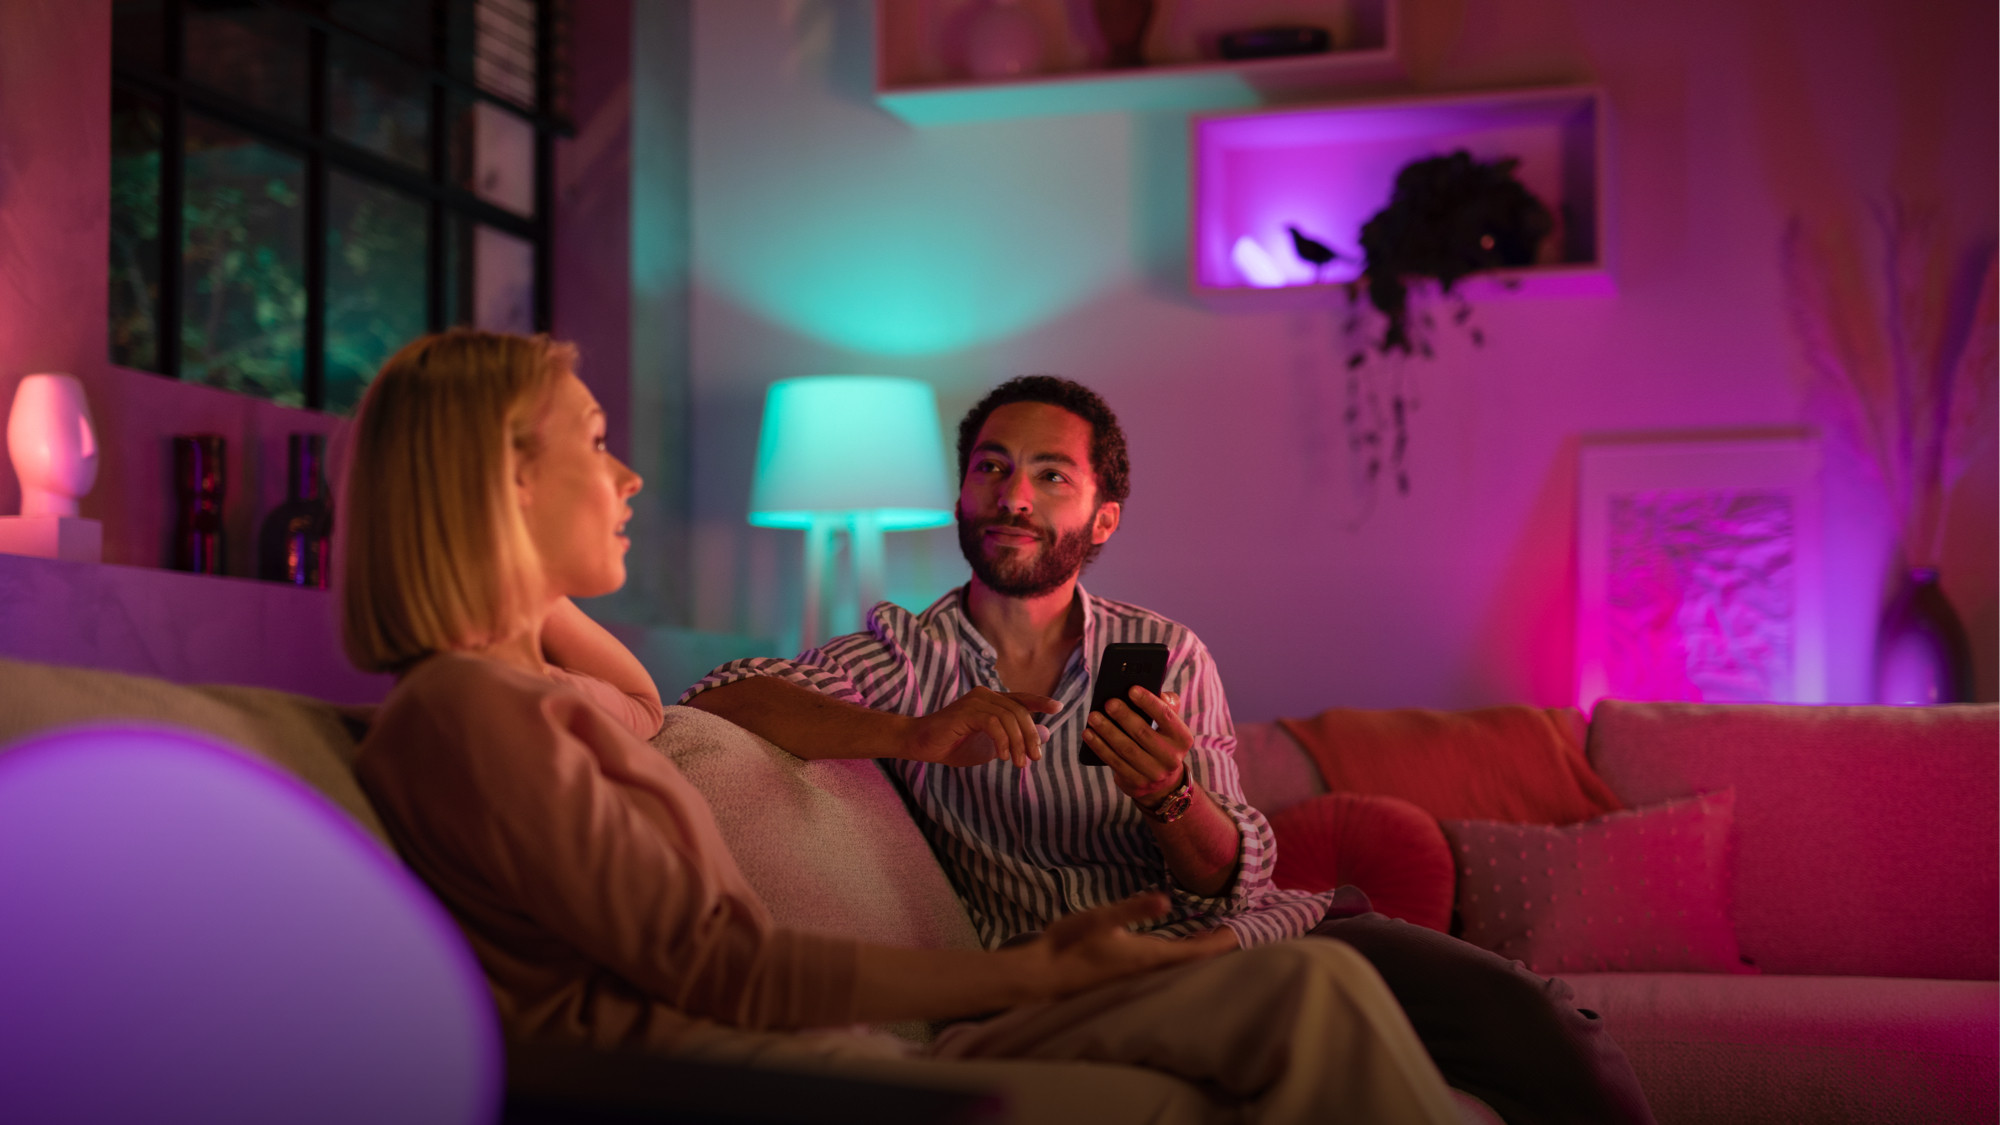 Philips Hue smart lights illuminate a room as two people chat